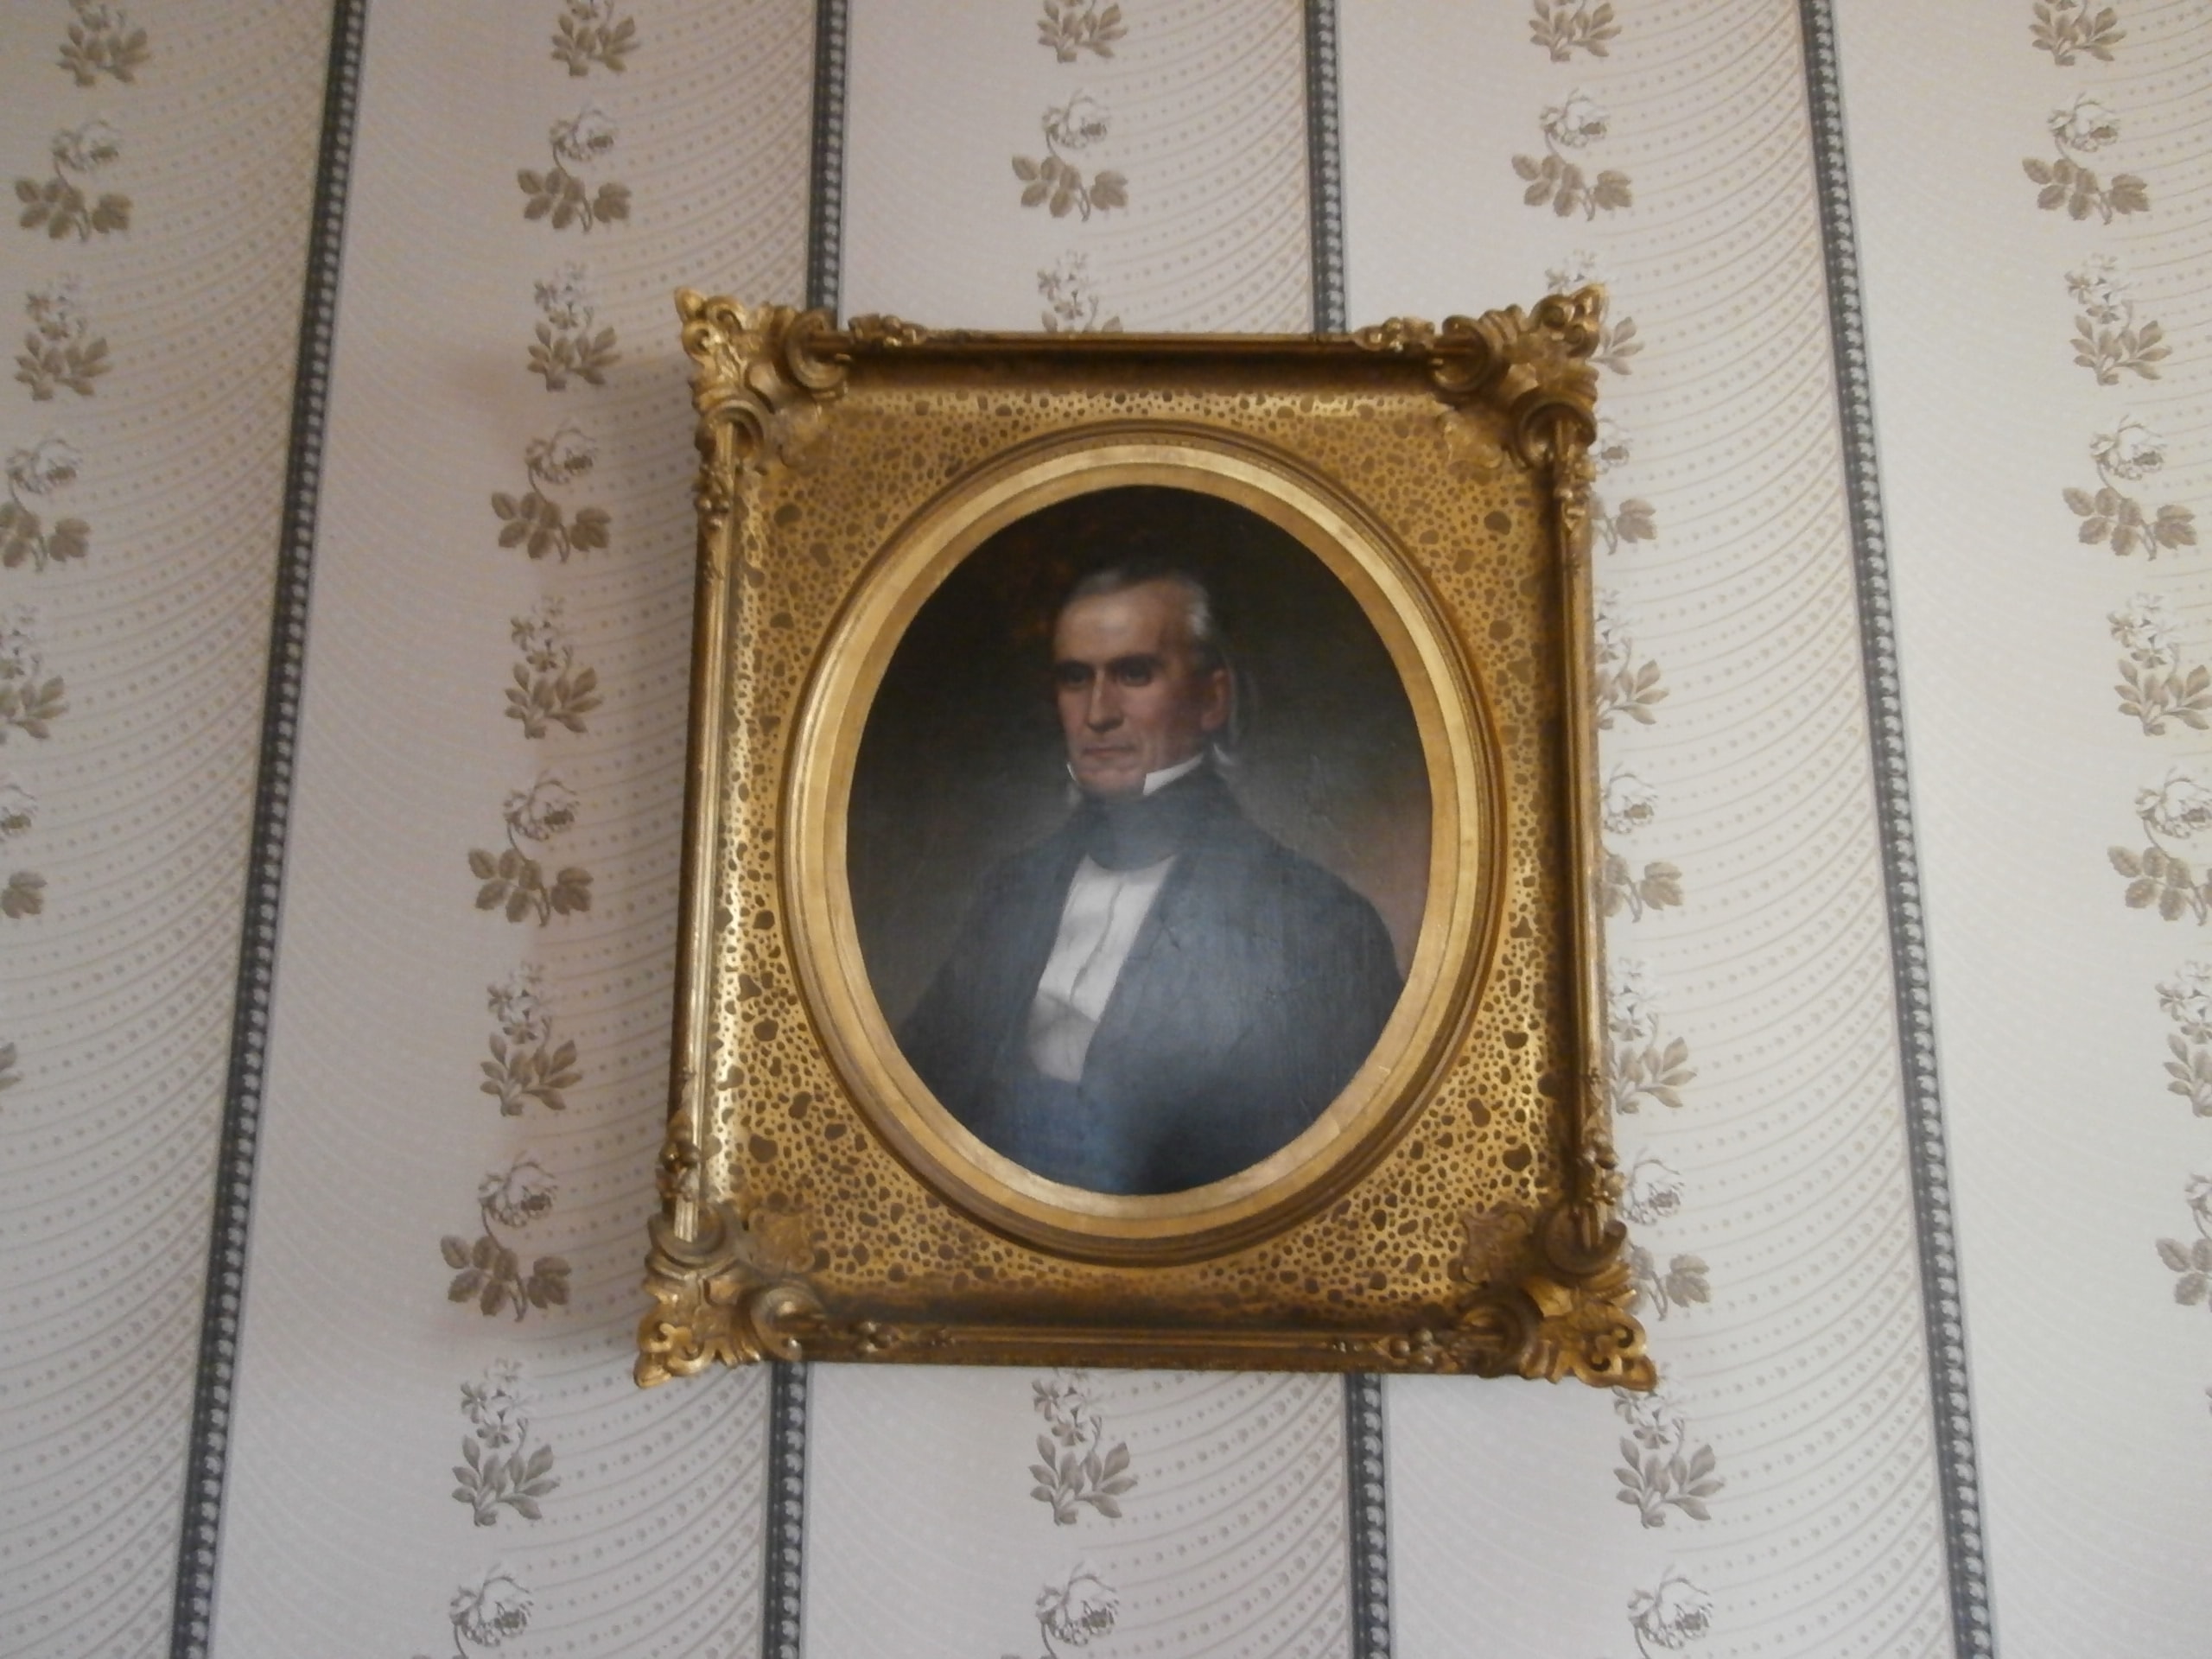 Portrait of James K Polk after he left the Presidency - Polk's Home, Columbia, Tennessee